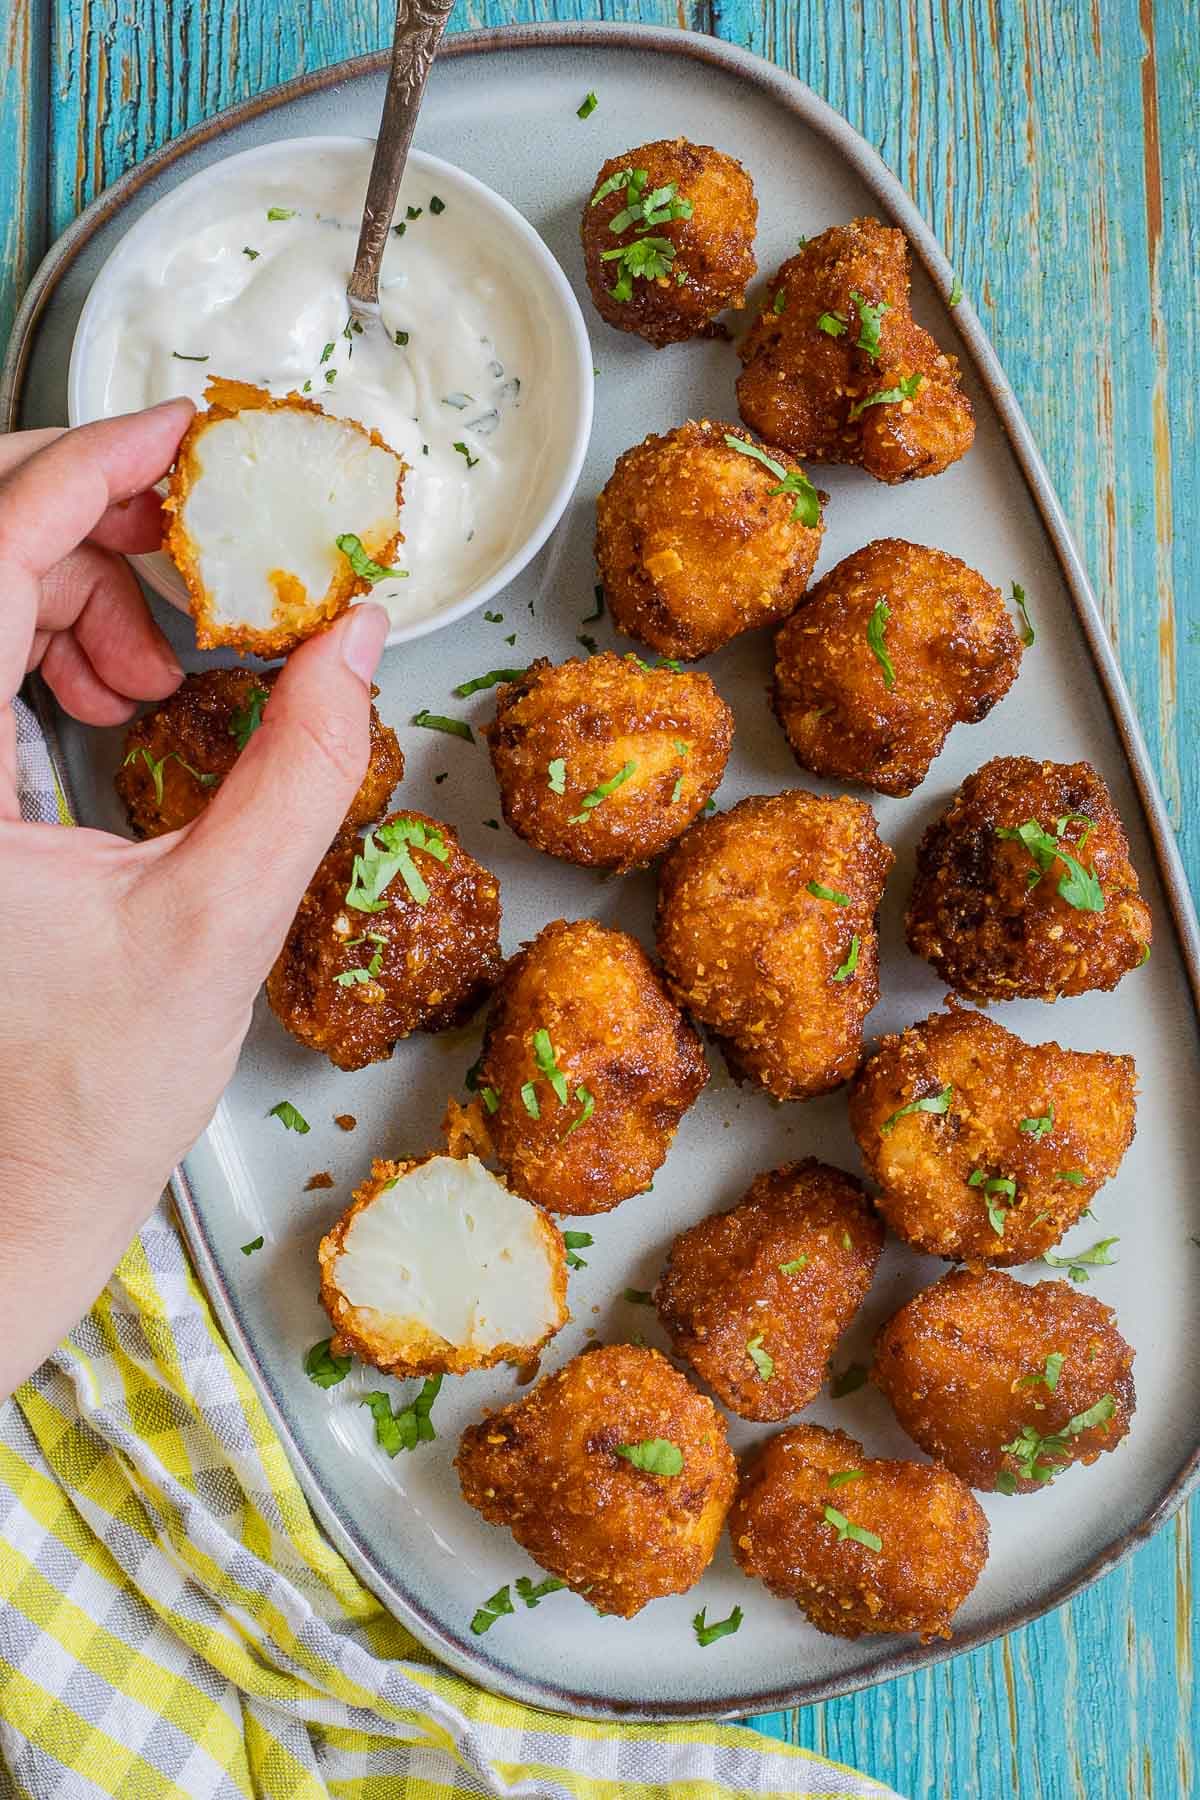 Breaded cauliflower florets in a light blue plate sprinkled with chopped green herbs and served with a small bowl of white sauce. One floret is cut in half to show the white insides. A hand is holding one half and about to dip it.